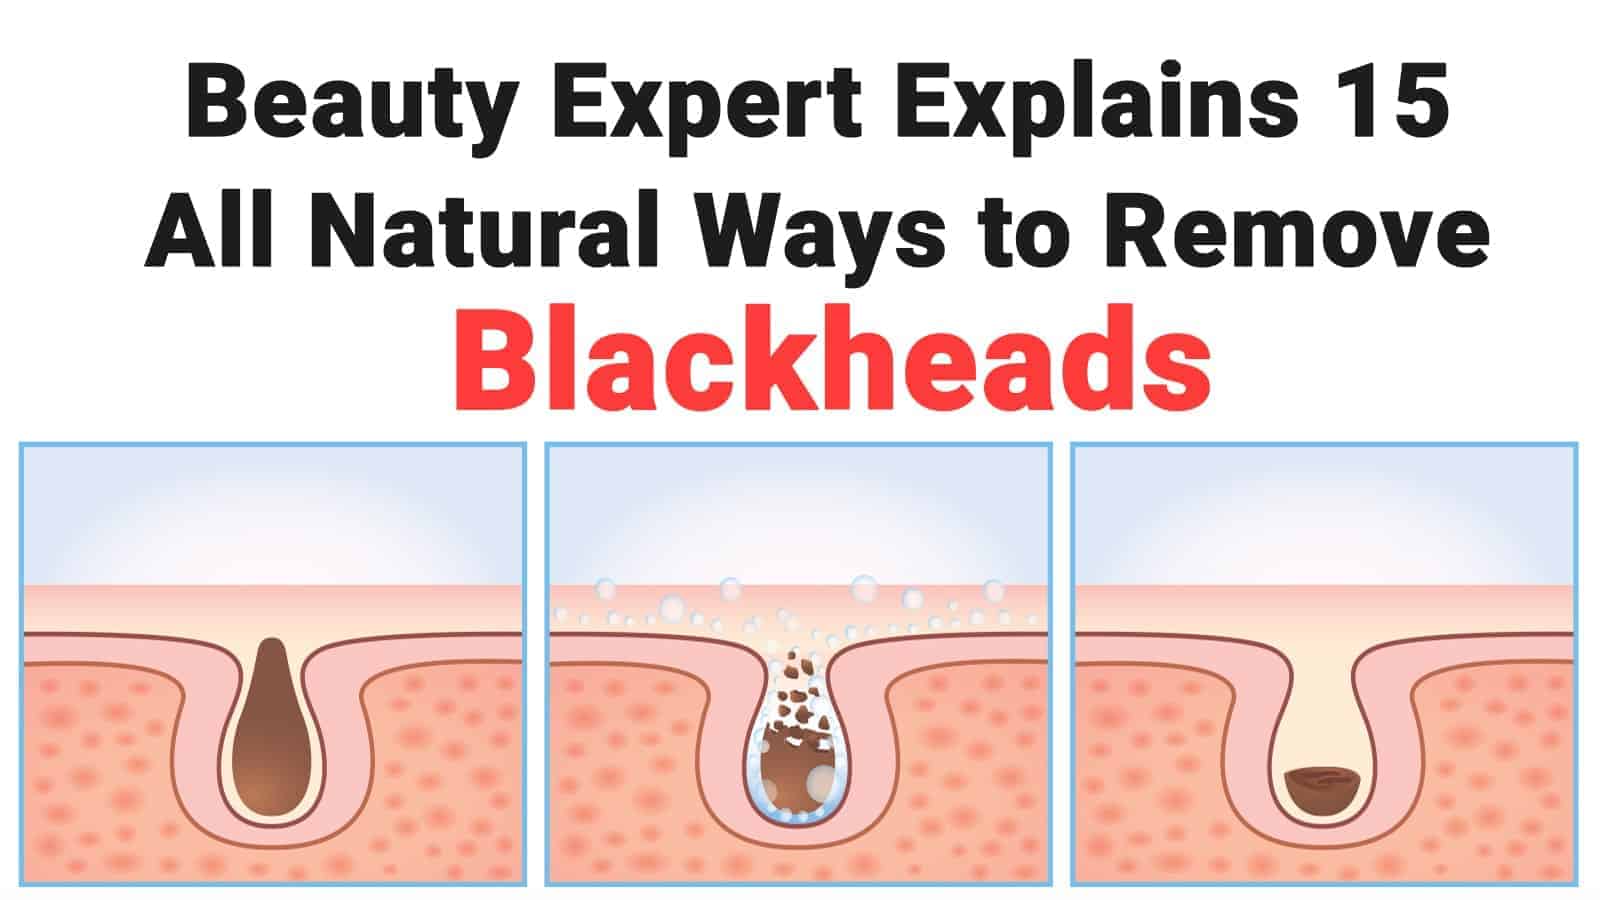 Beauty Expert Explains 15 All Natural Ways to Remove Blackheads